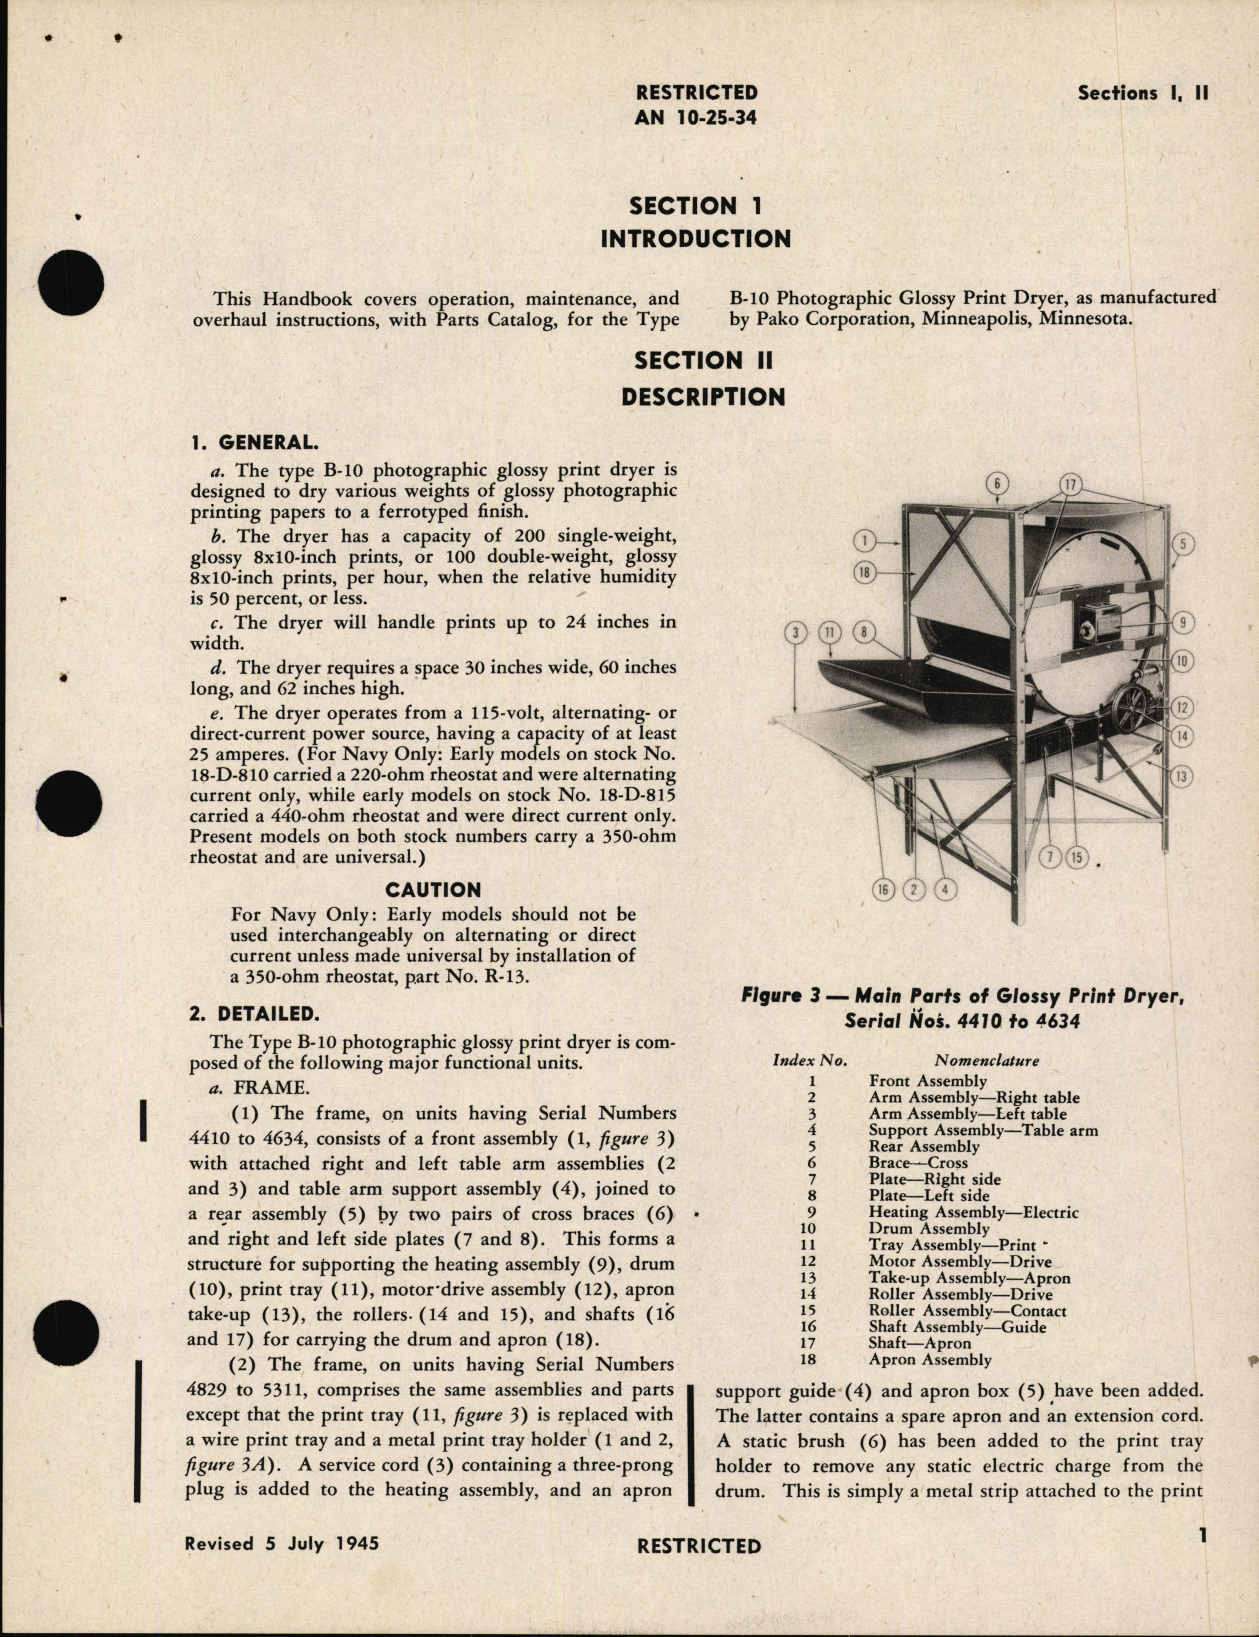 Sample page 7 from AirCorps Library document: Operation, Service, & Overhaul Instructions with Parts Catalog for Type B-10 Photographic Glossy Print Dryer